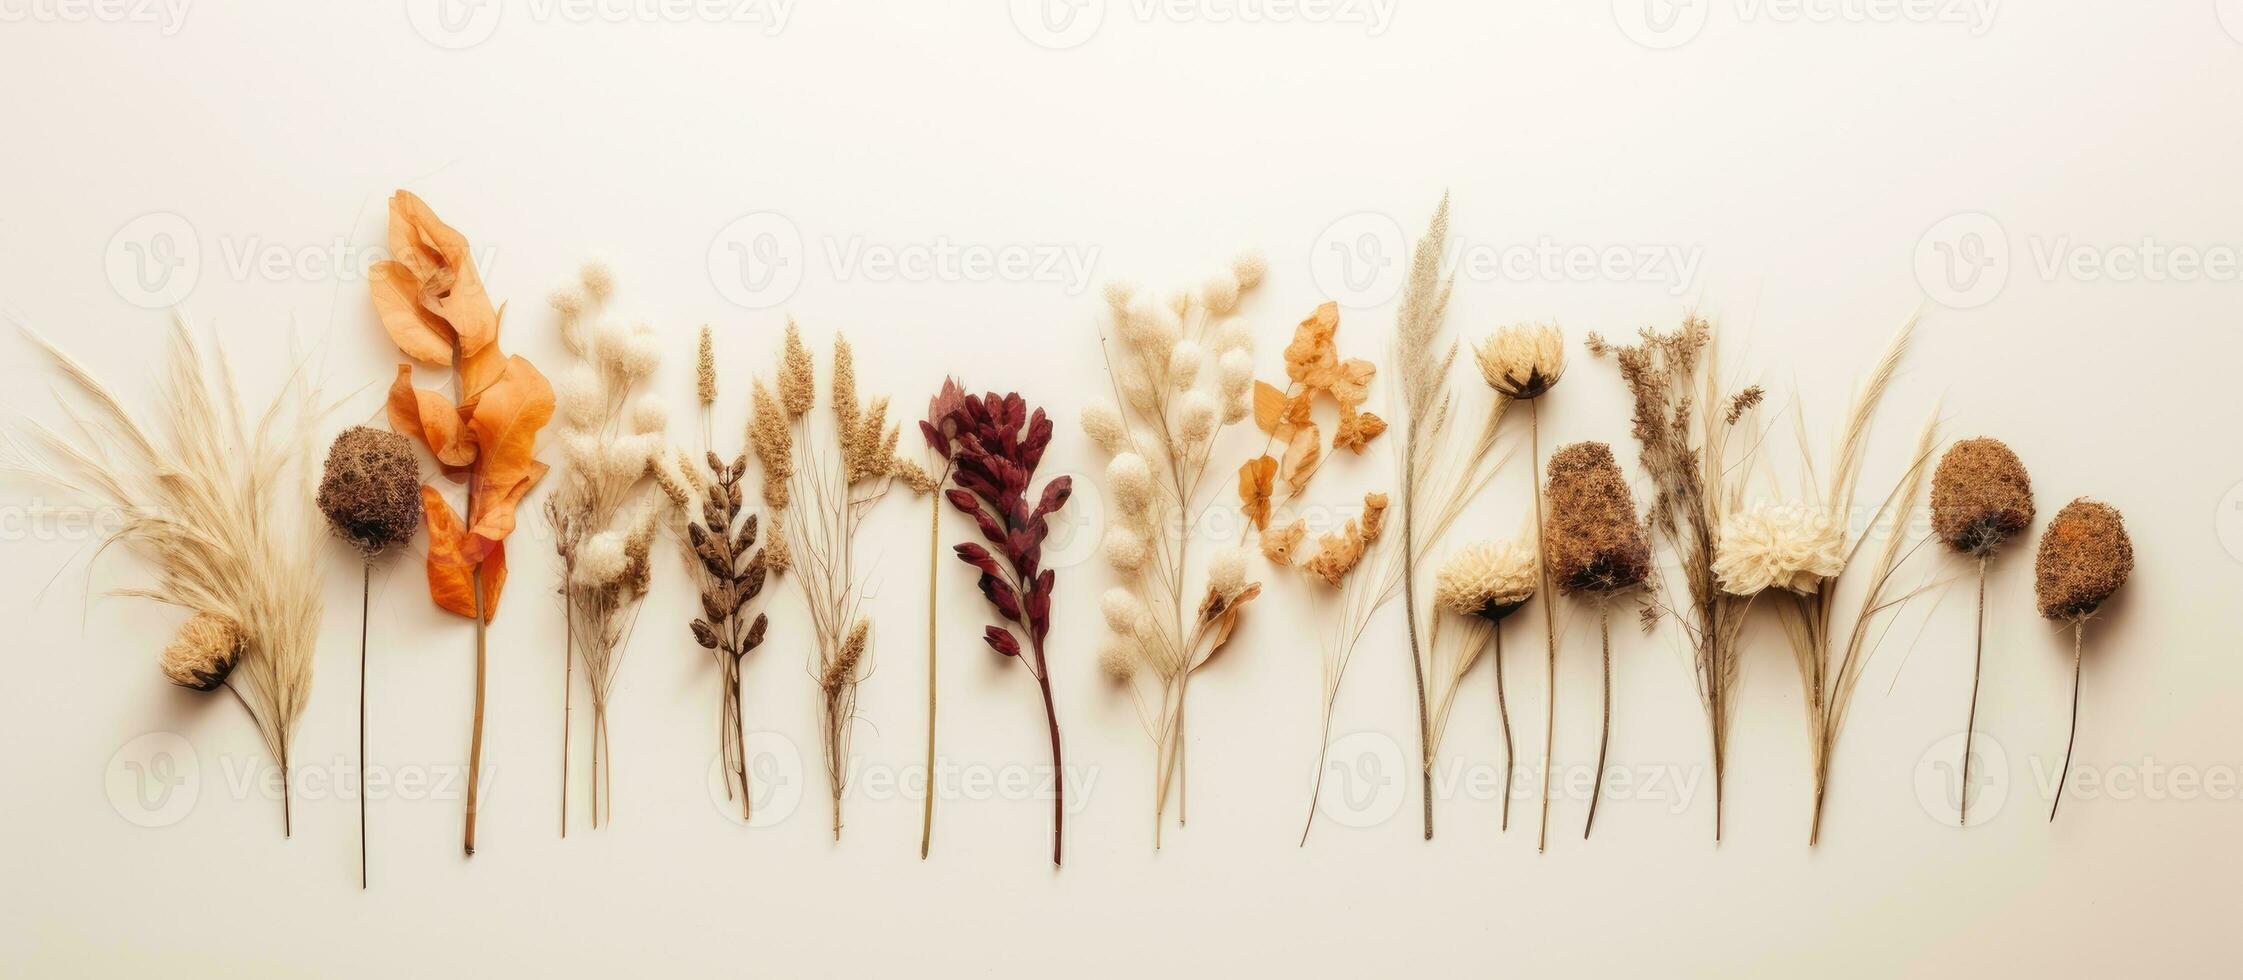 Minimal style photography featuring dried flowers arranged in a creative and natural composition, photo